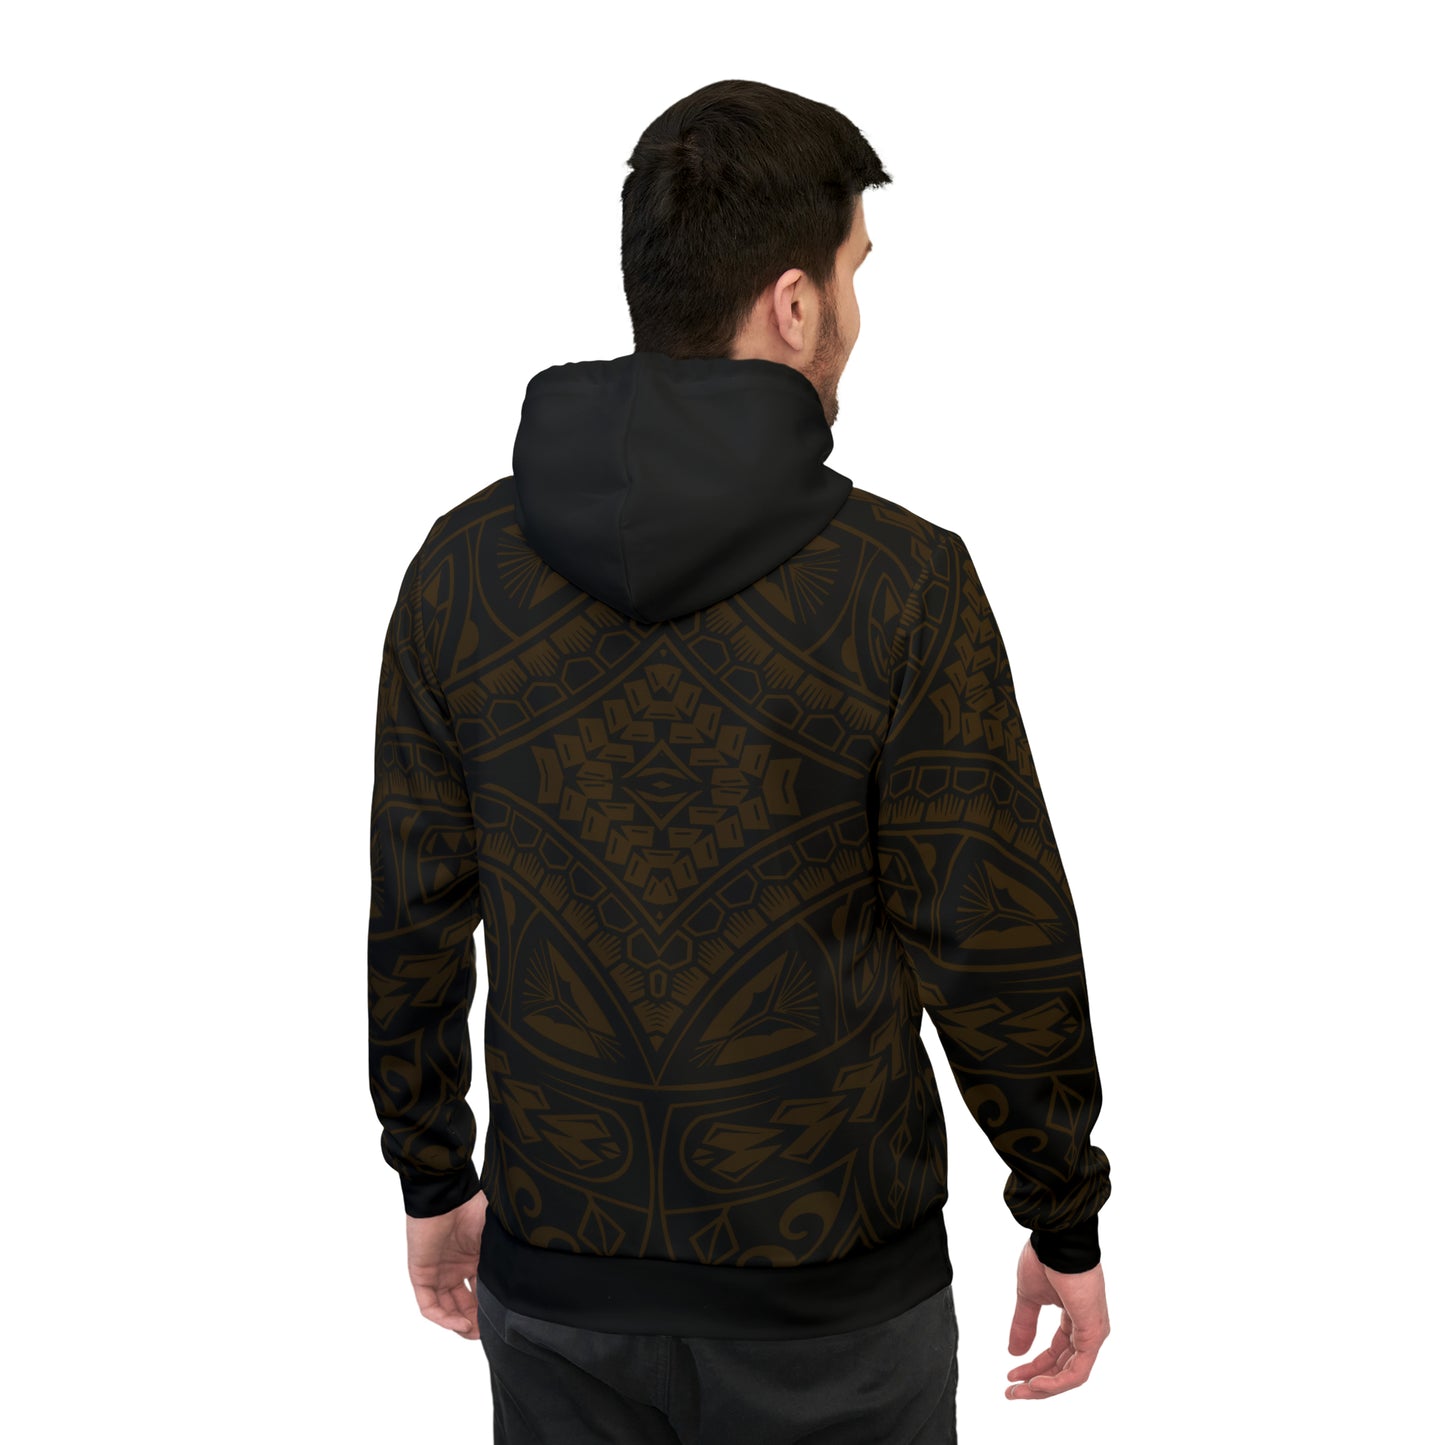 Fire Ball All Over Design Athletic Hoodie